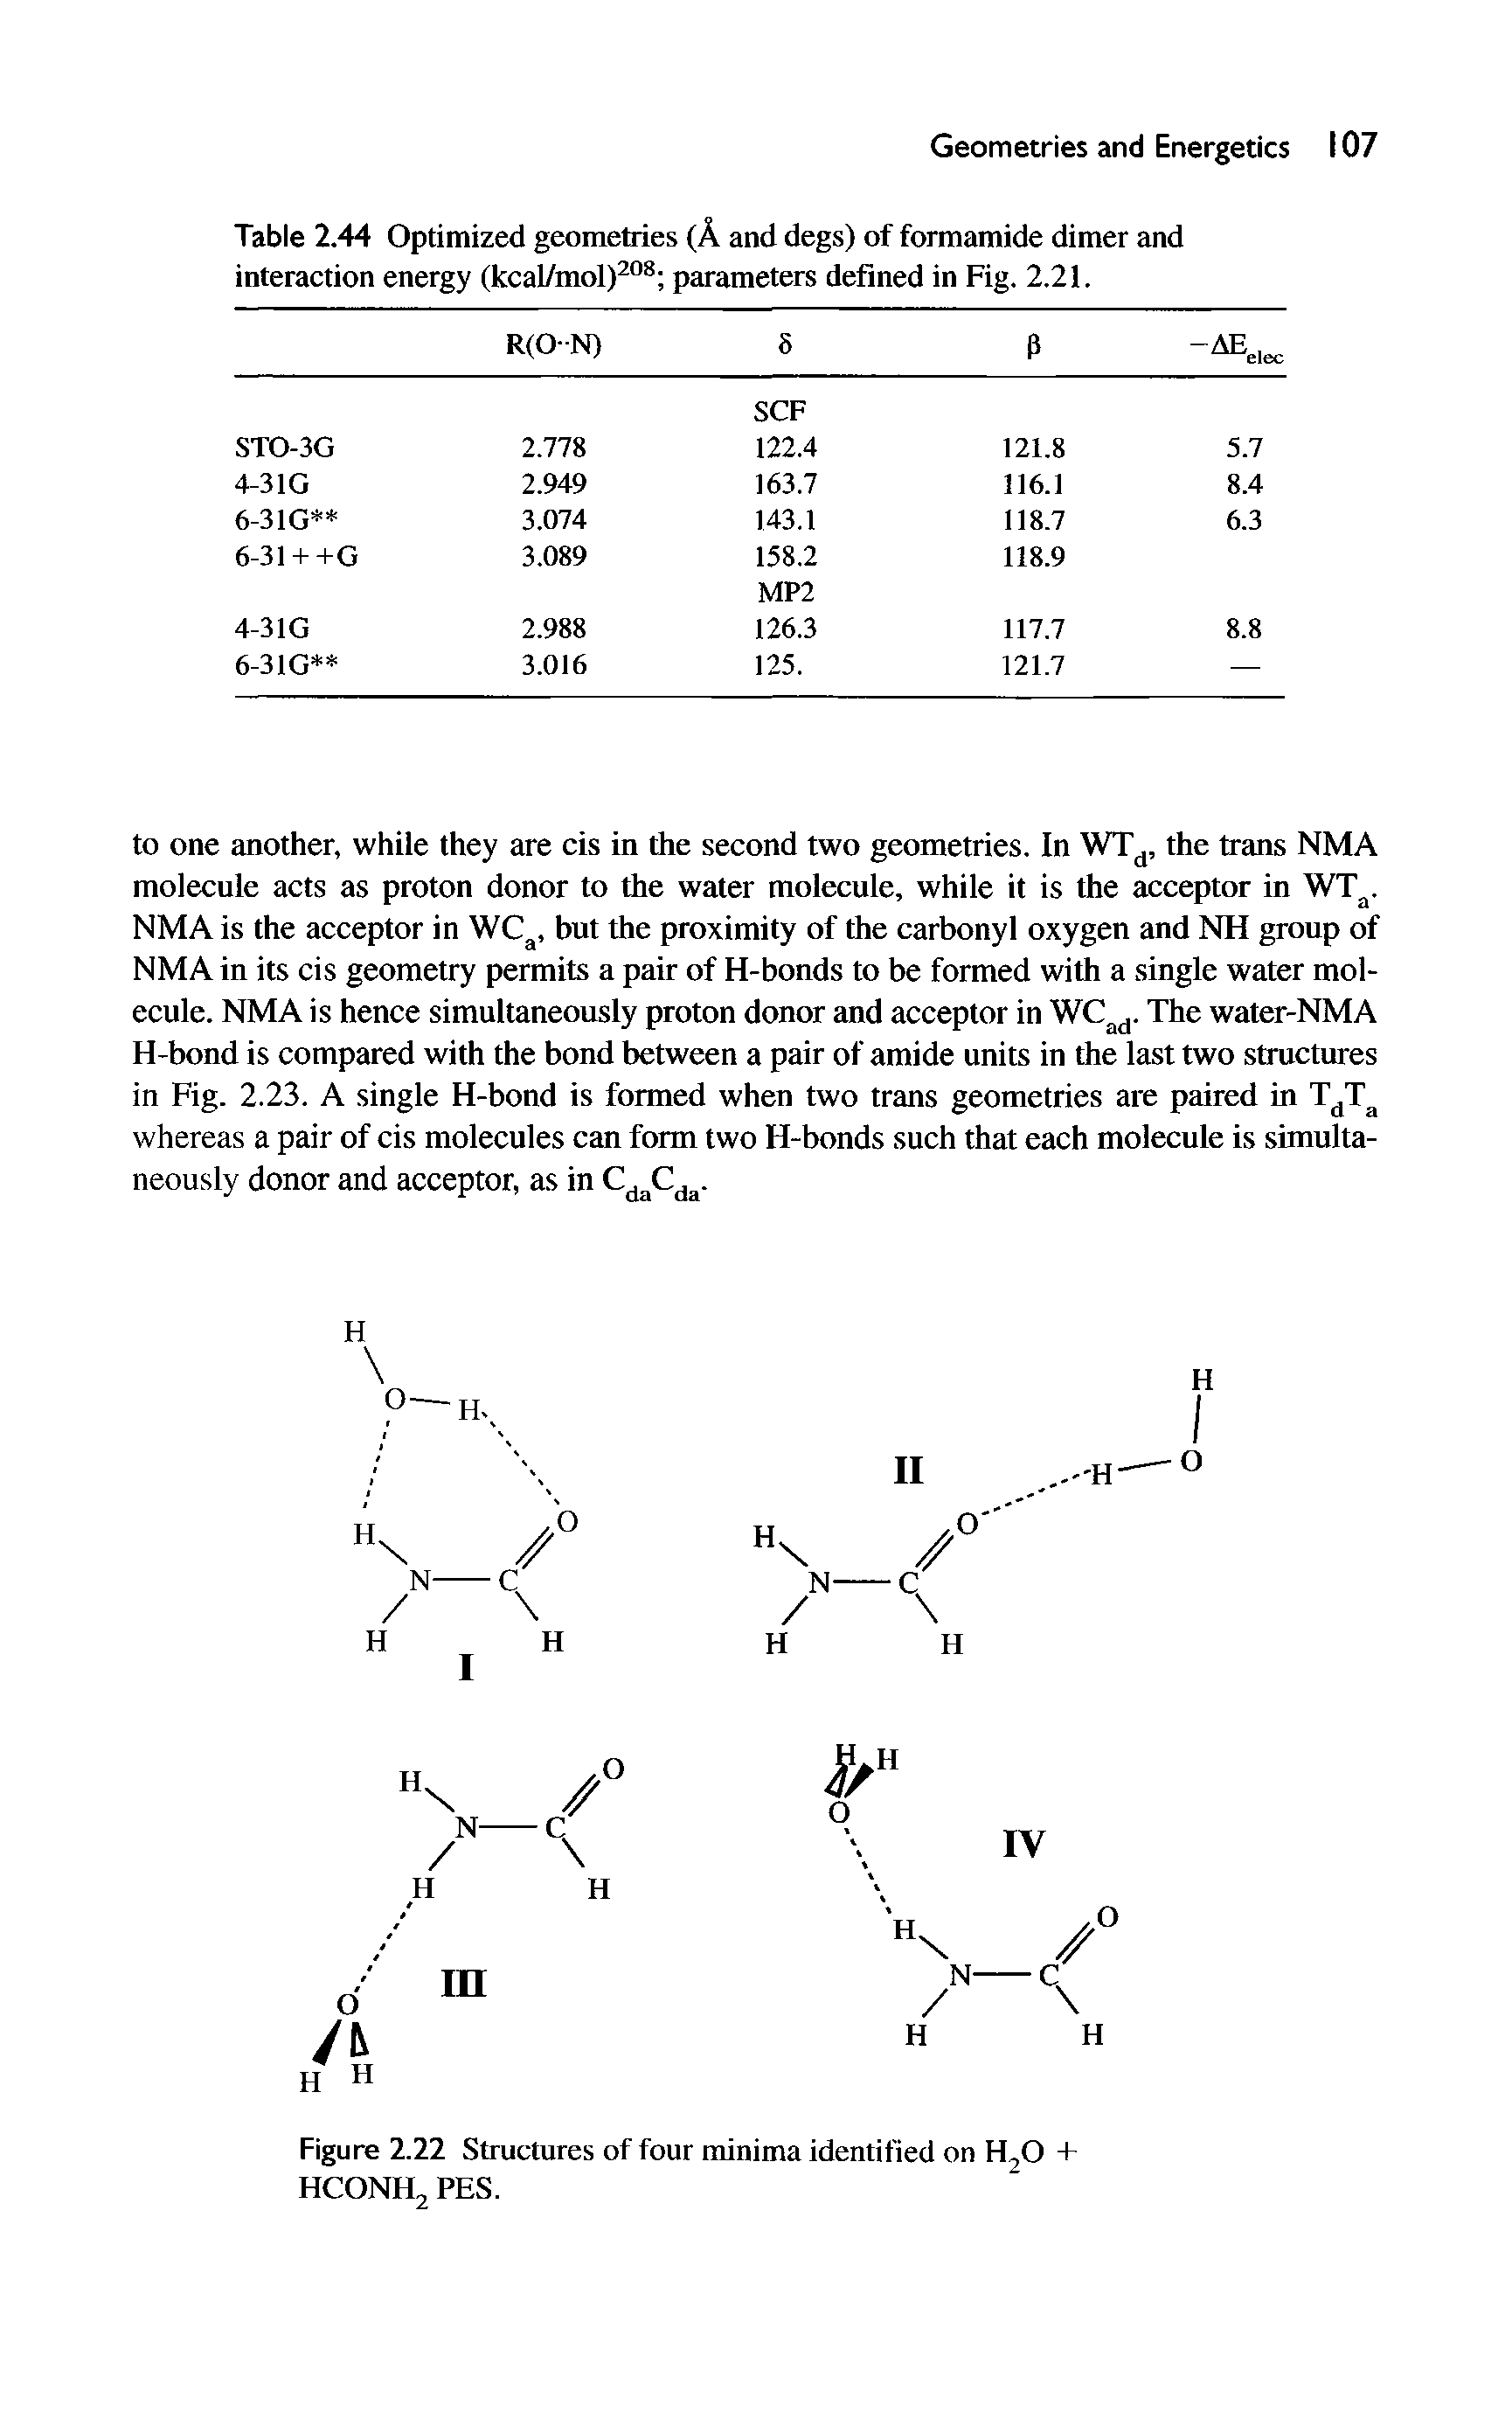 Table 2.44 Optimized geometries (A and degs) of formamide dimer and interaction energy (kcal/mol) ° parameters defined in Fig. 2.21.